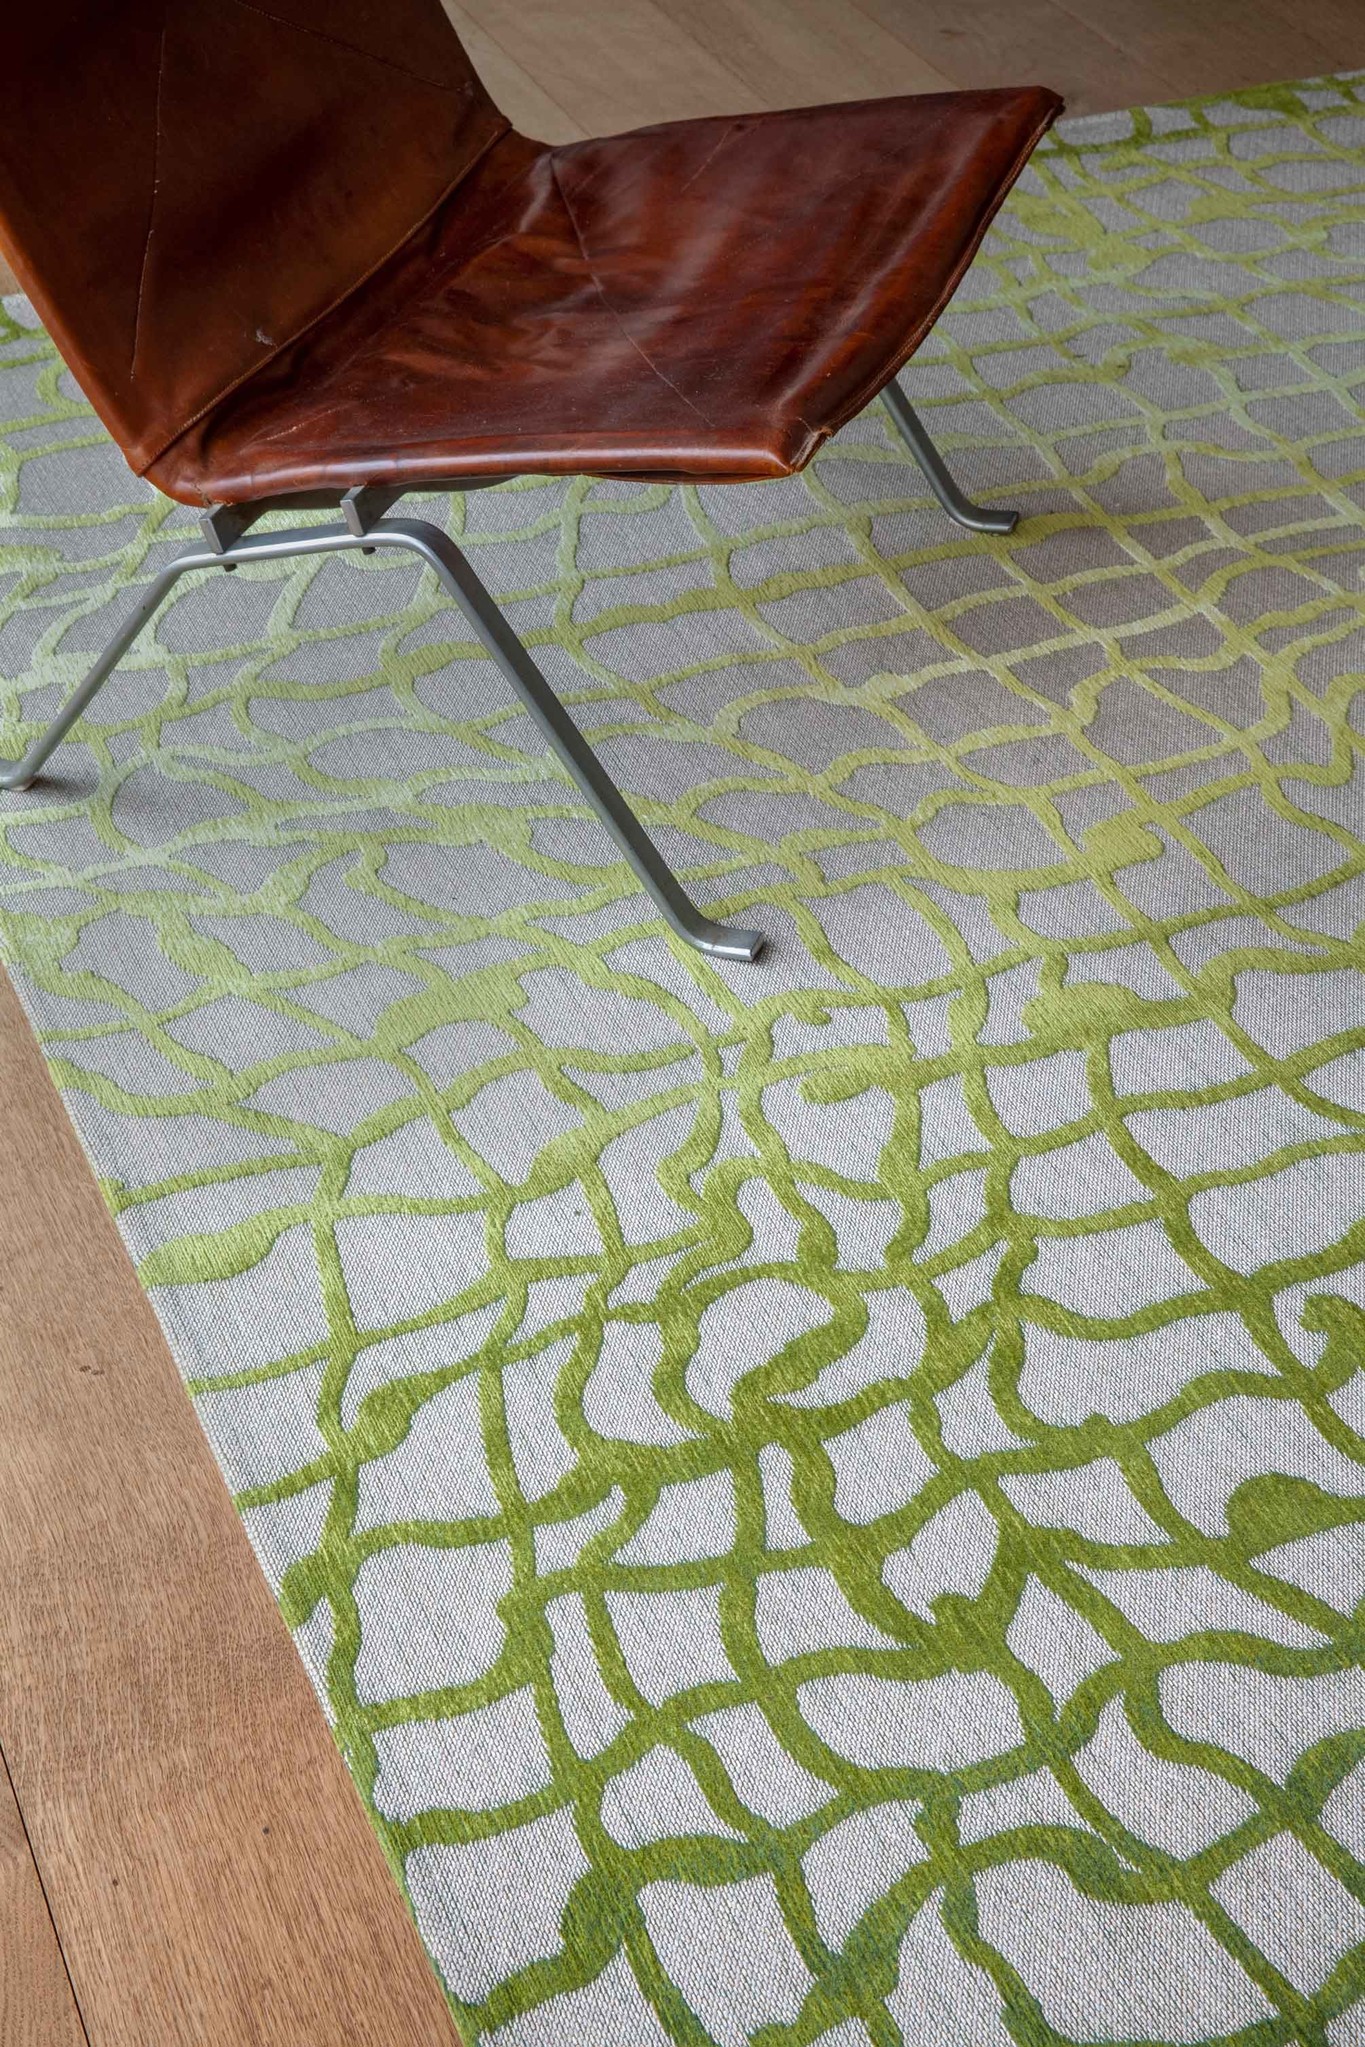 Green Flatwoven Rug ☞ Size: 4' 7" x 6' 7" (140 x 200 cm)